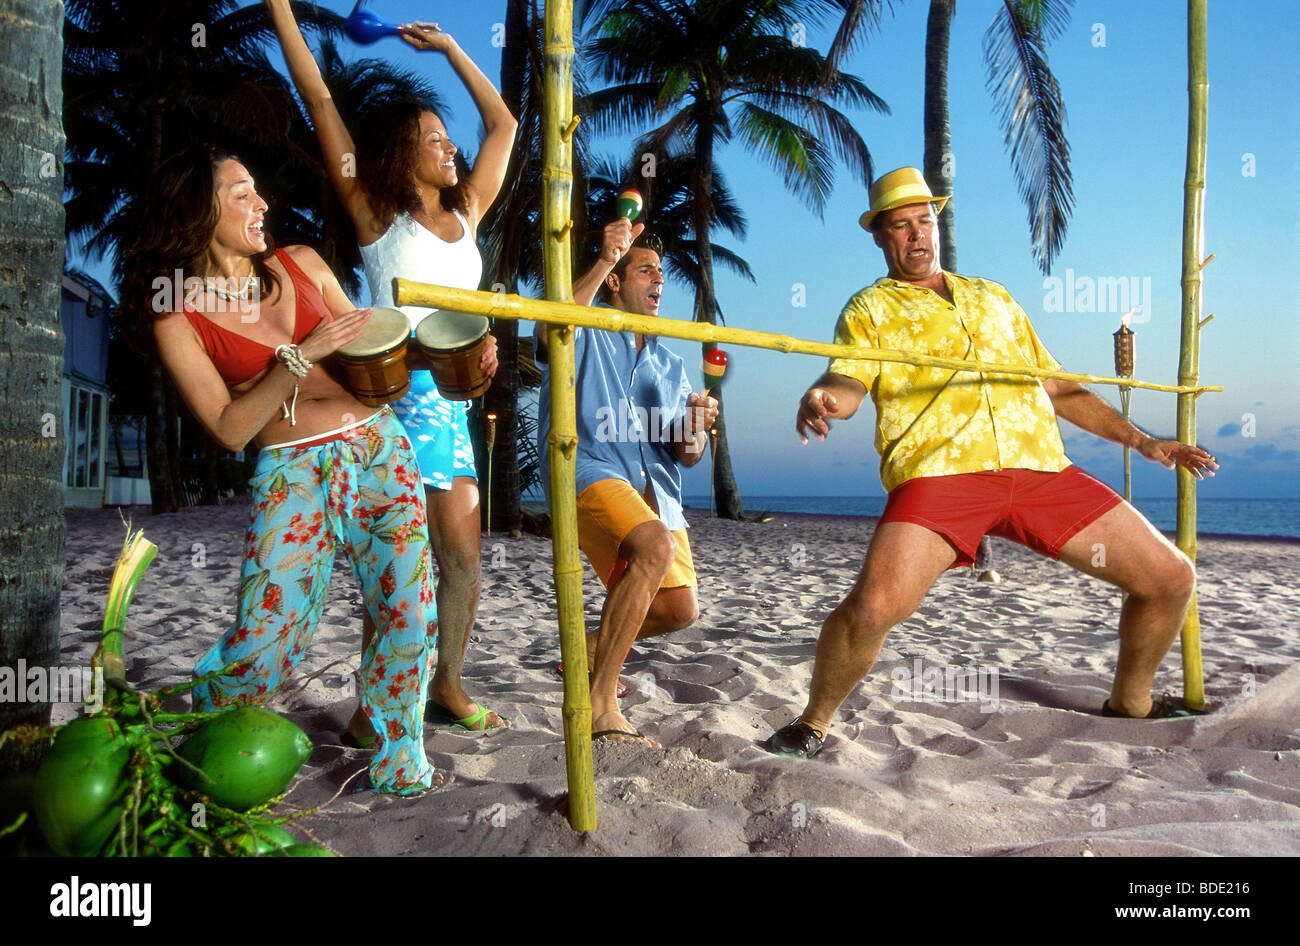 vacationers-have-fun-doing-the-limbo-BDE216.jpg